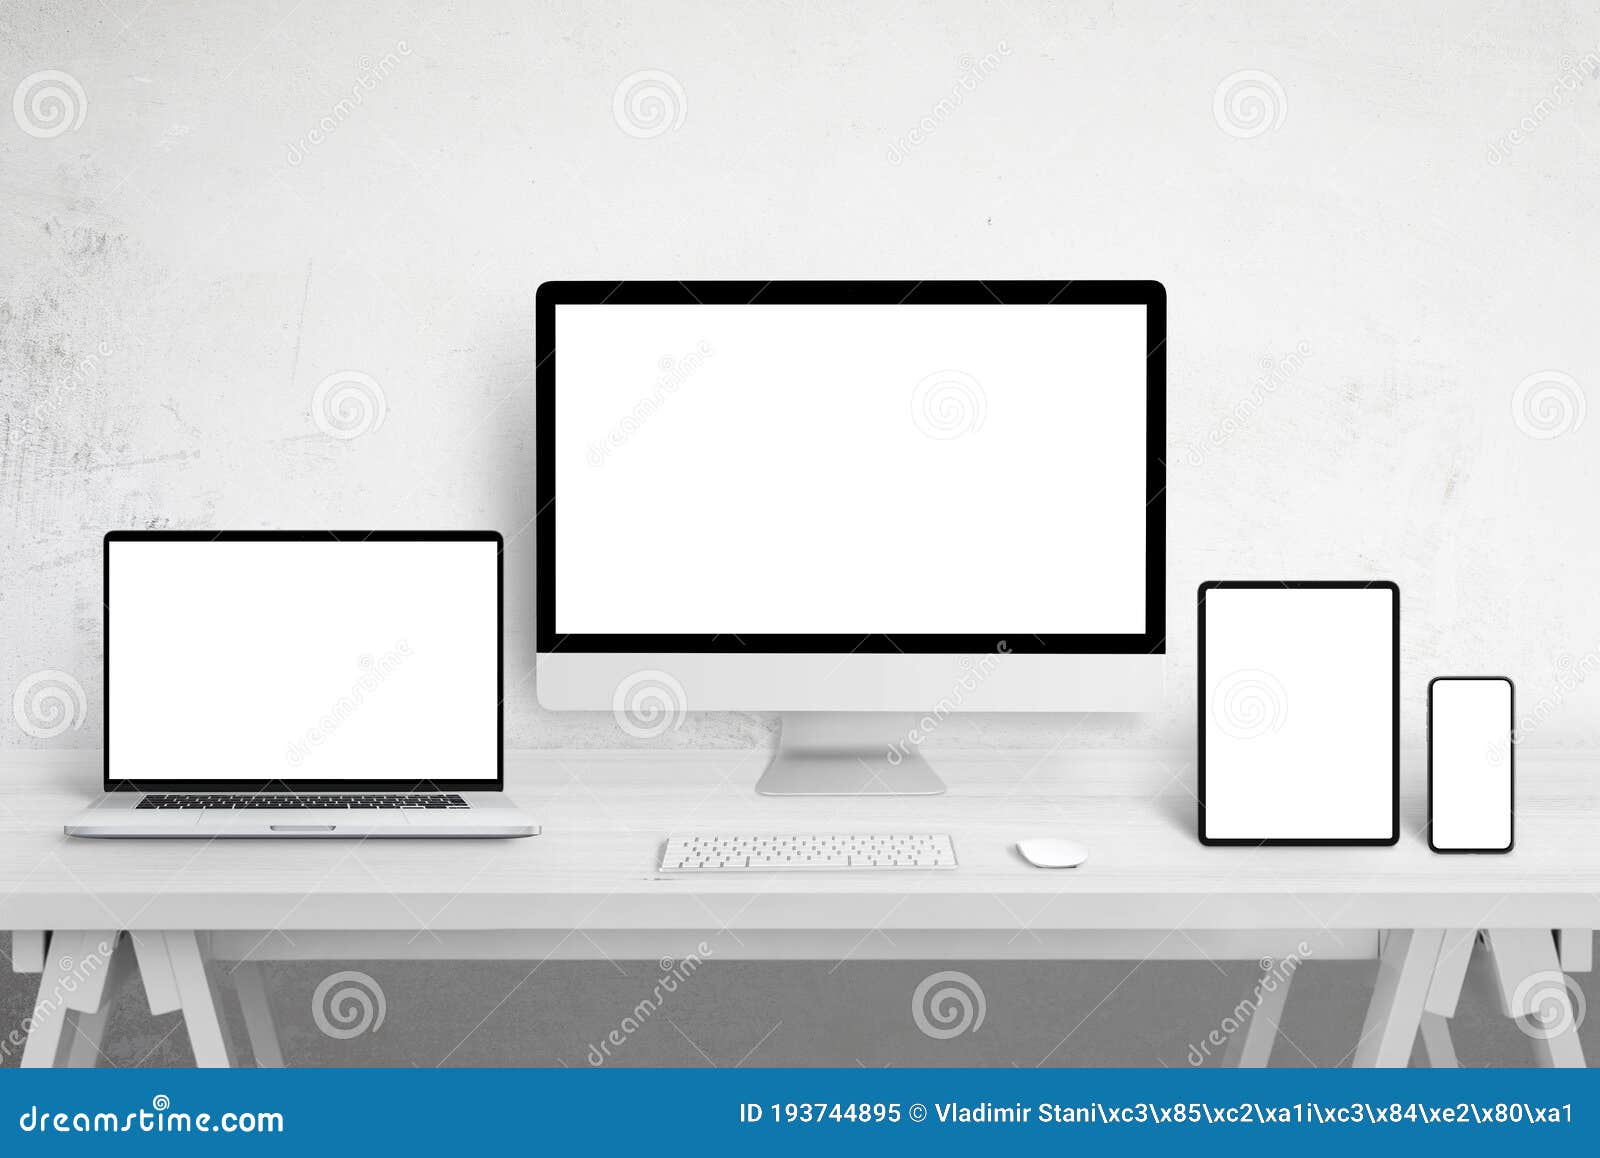 responsive devices mockup for web site  promotion on different display sizes.  white screens